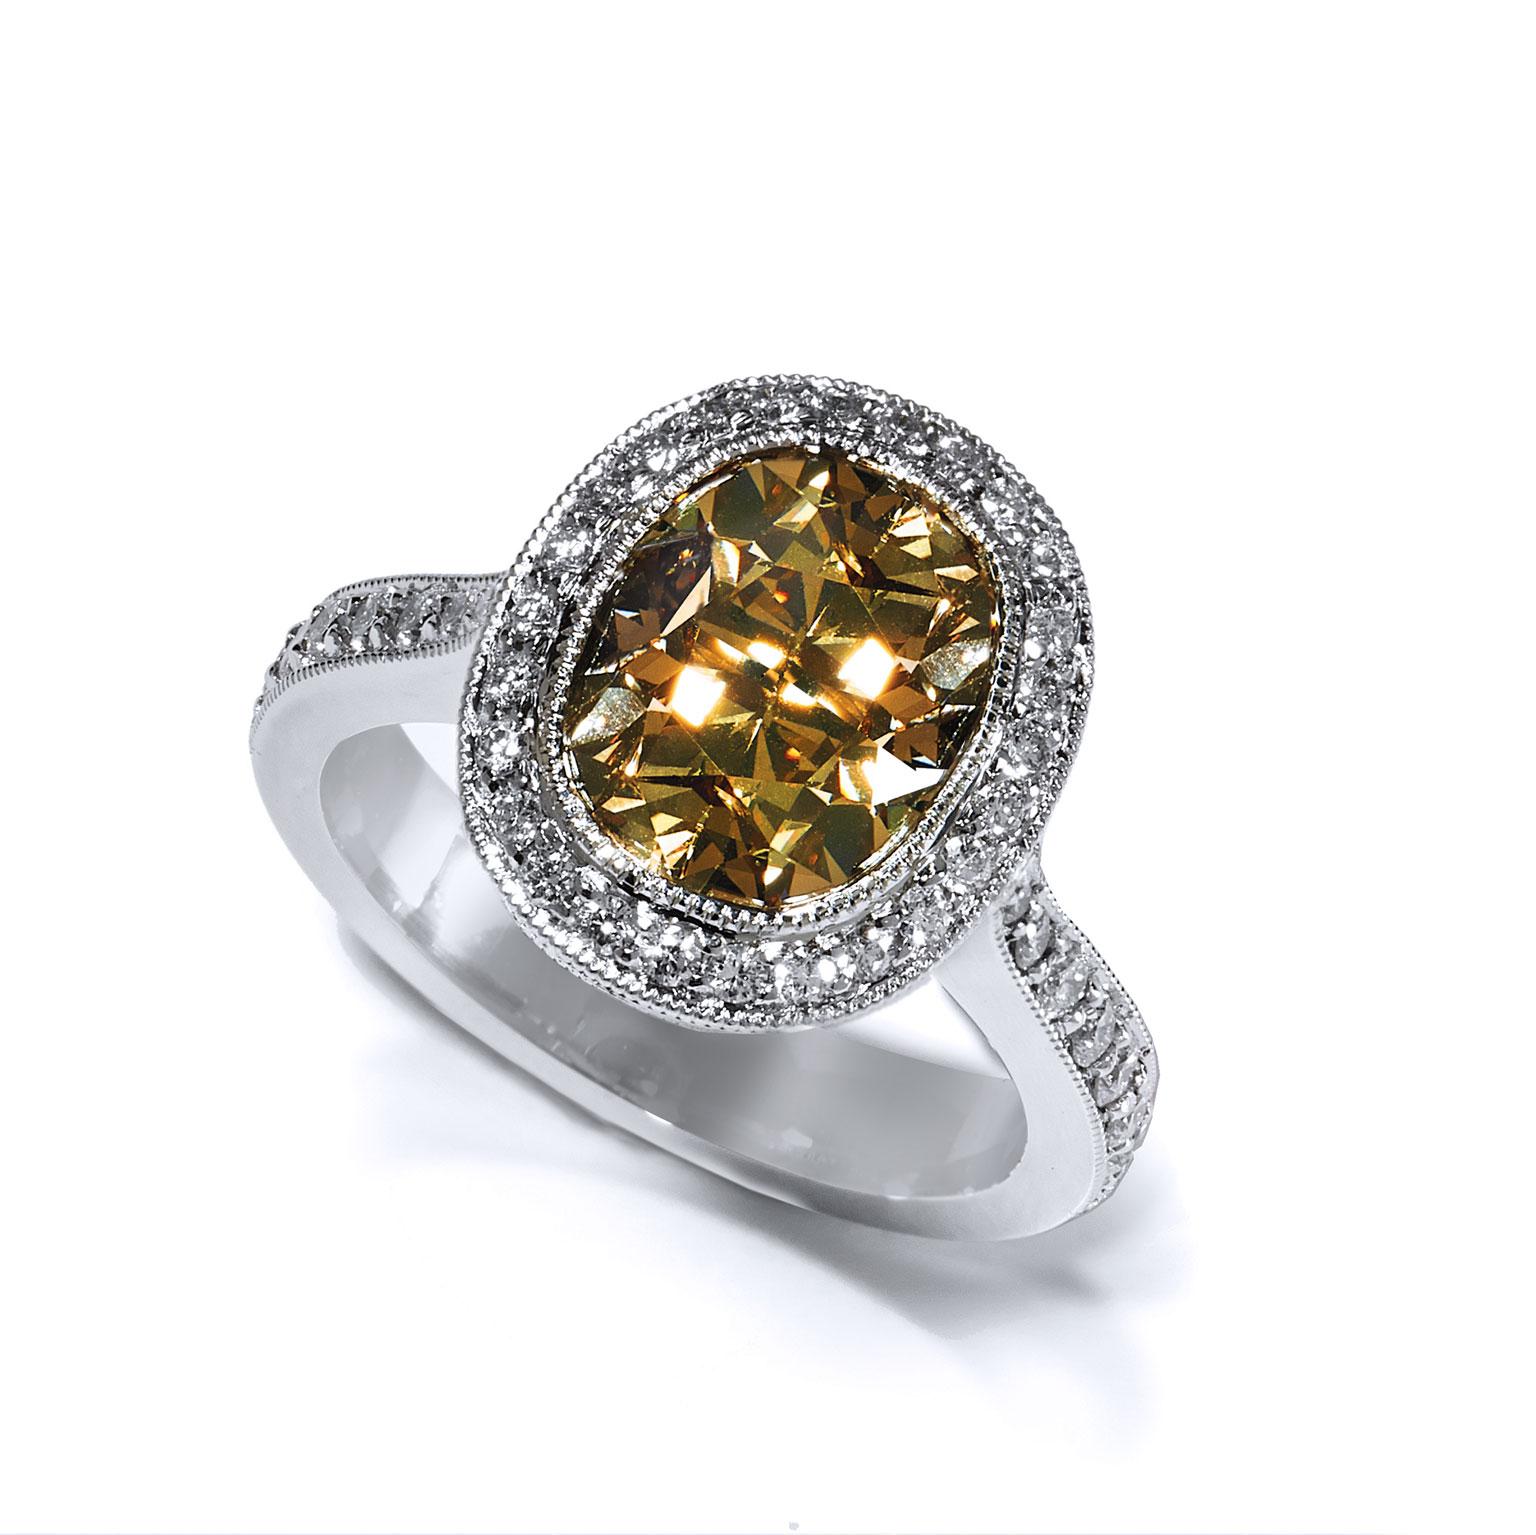 Handmade GIA Certified4.03ct Fancy Yellow Brown Diamond Platinum Engagement Ring In New Condition For Sale In Miami, FL